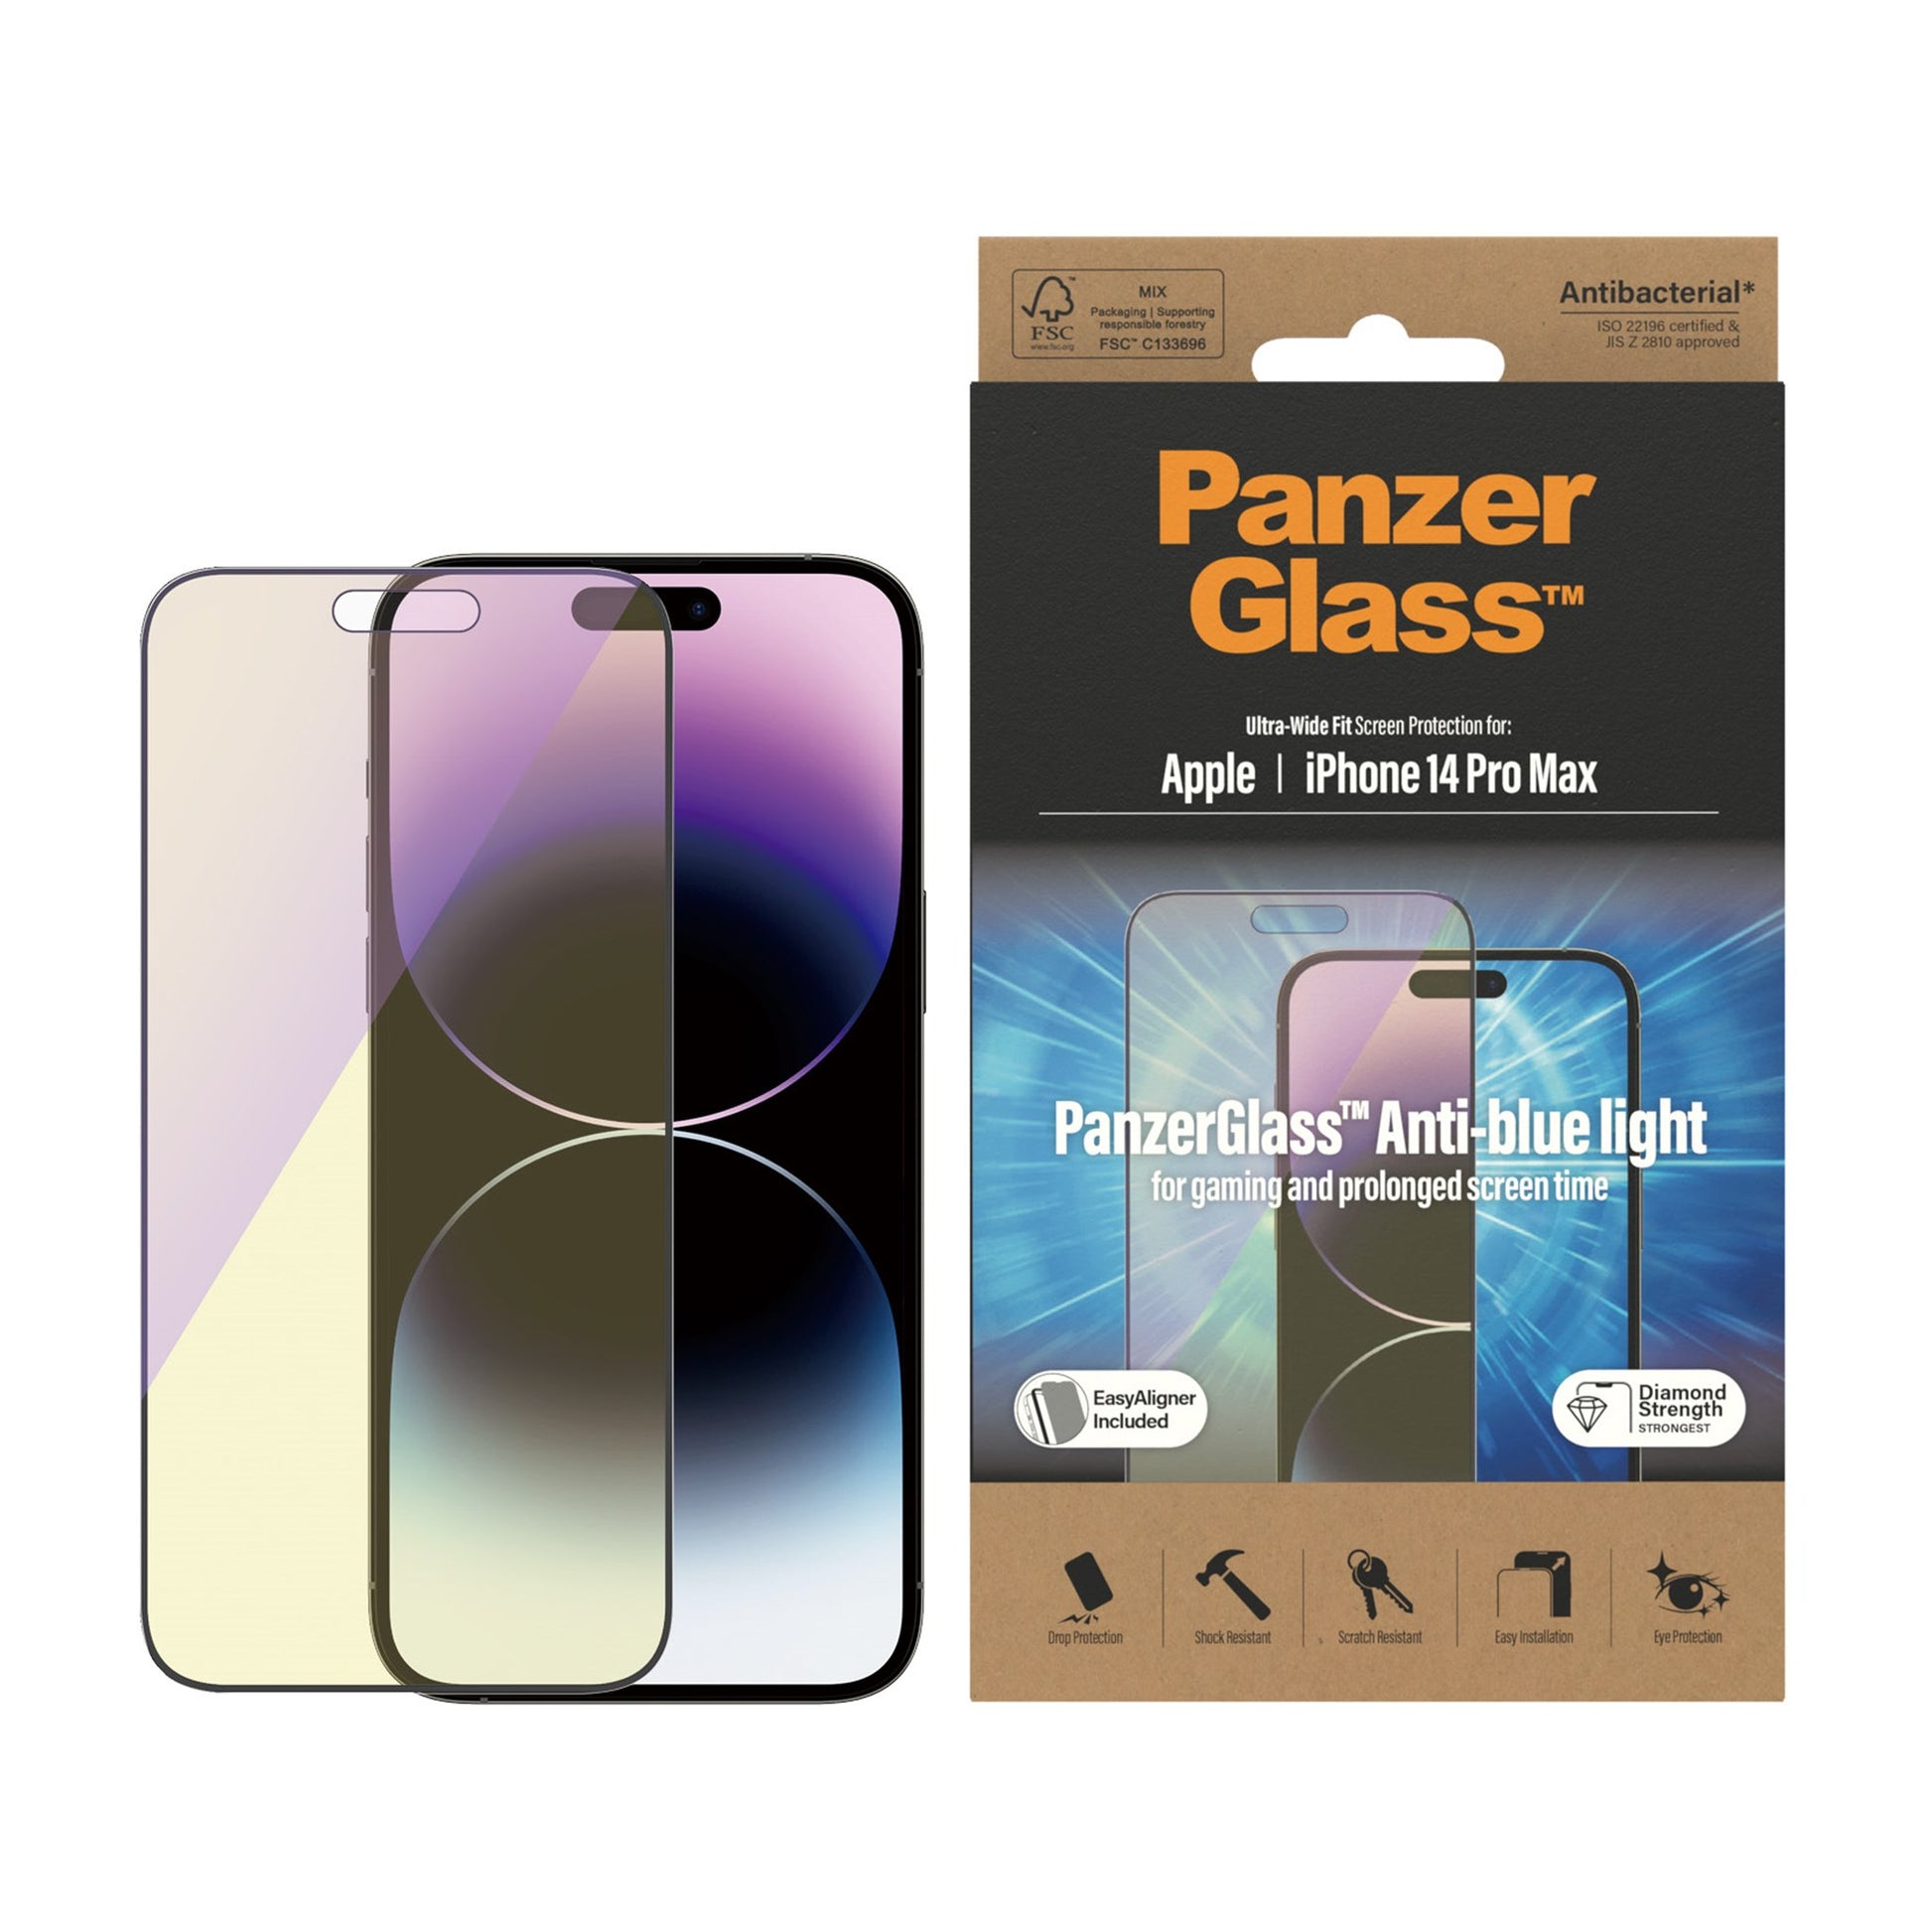 PanzerGlass™ Anti-blue light Screen Protector Apple iPhone 14 Pro Max | Ultra-Wide Fit w. EasyAligner 2